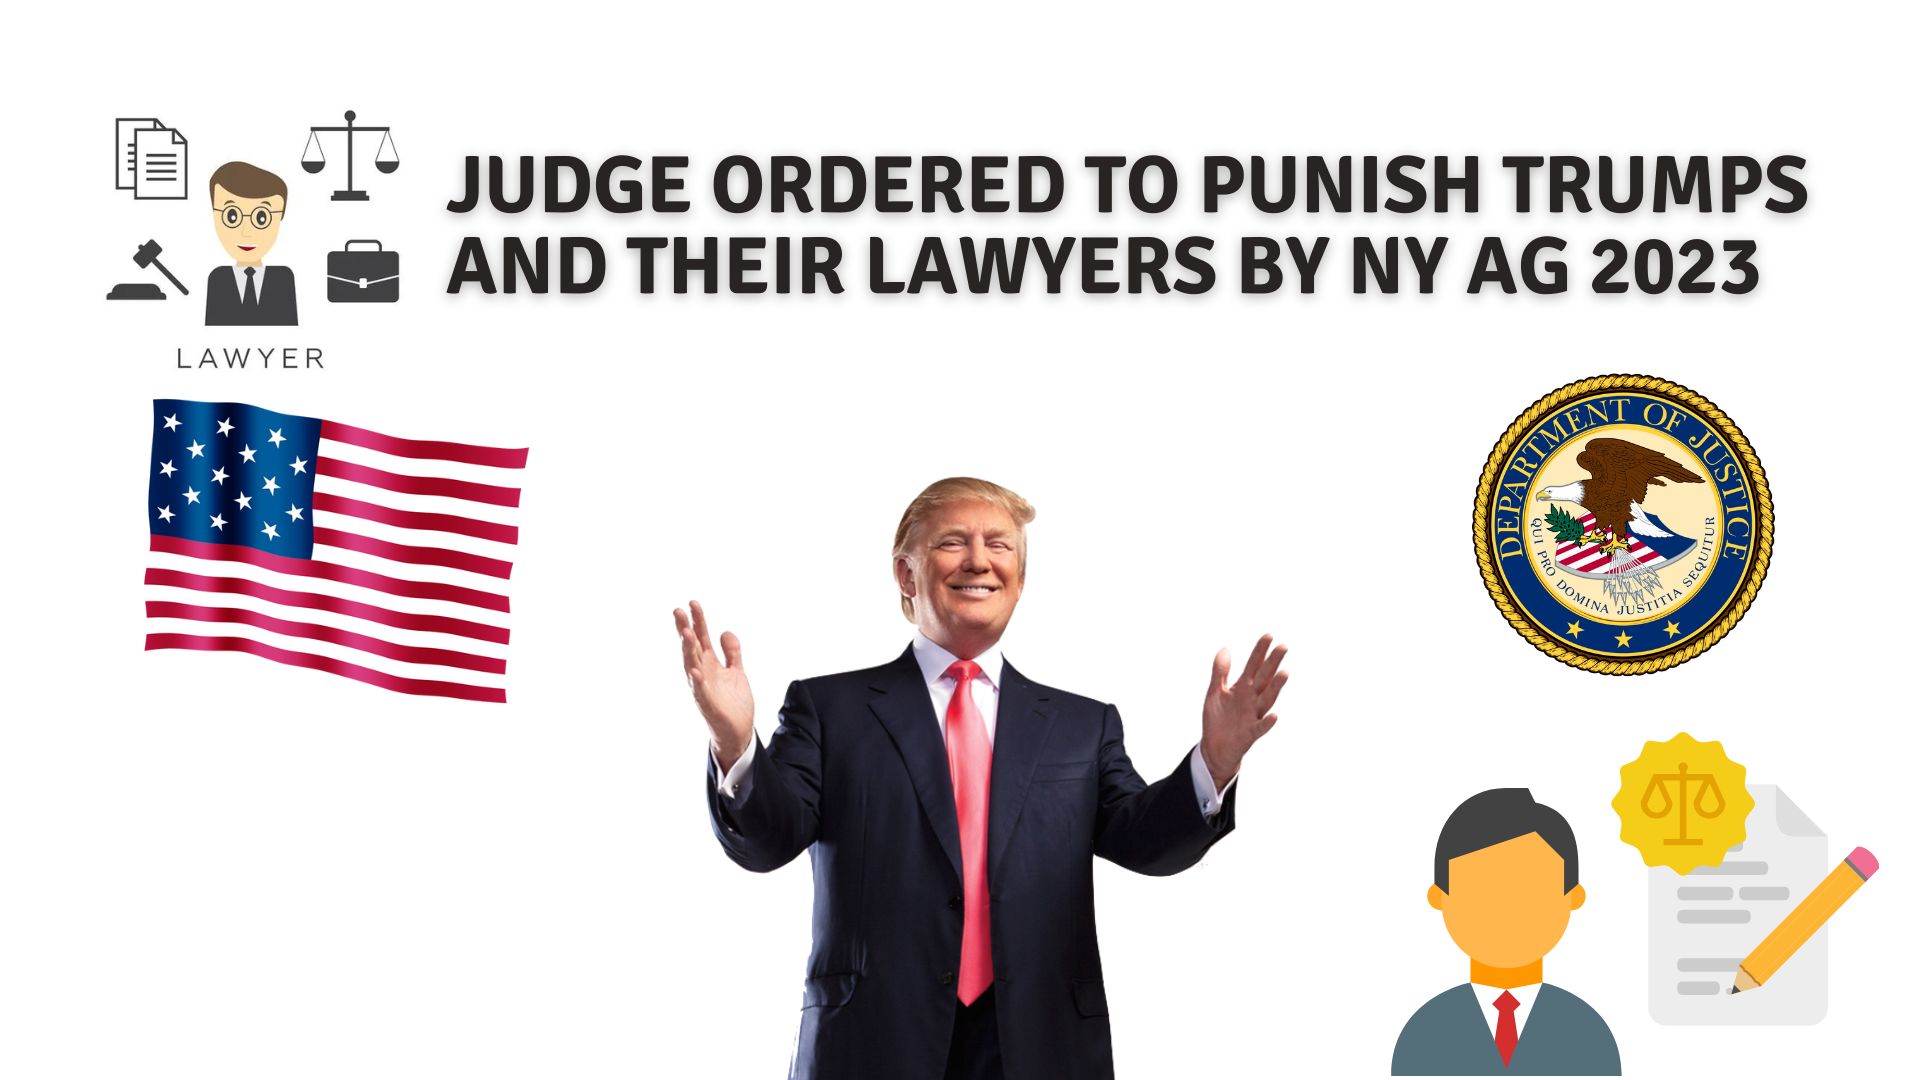 Judge ordered to punish trumps and their lawyers by ny ag 2023